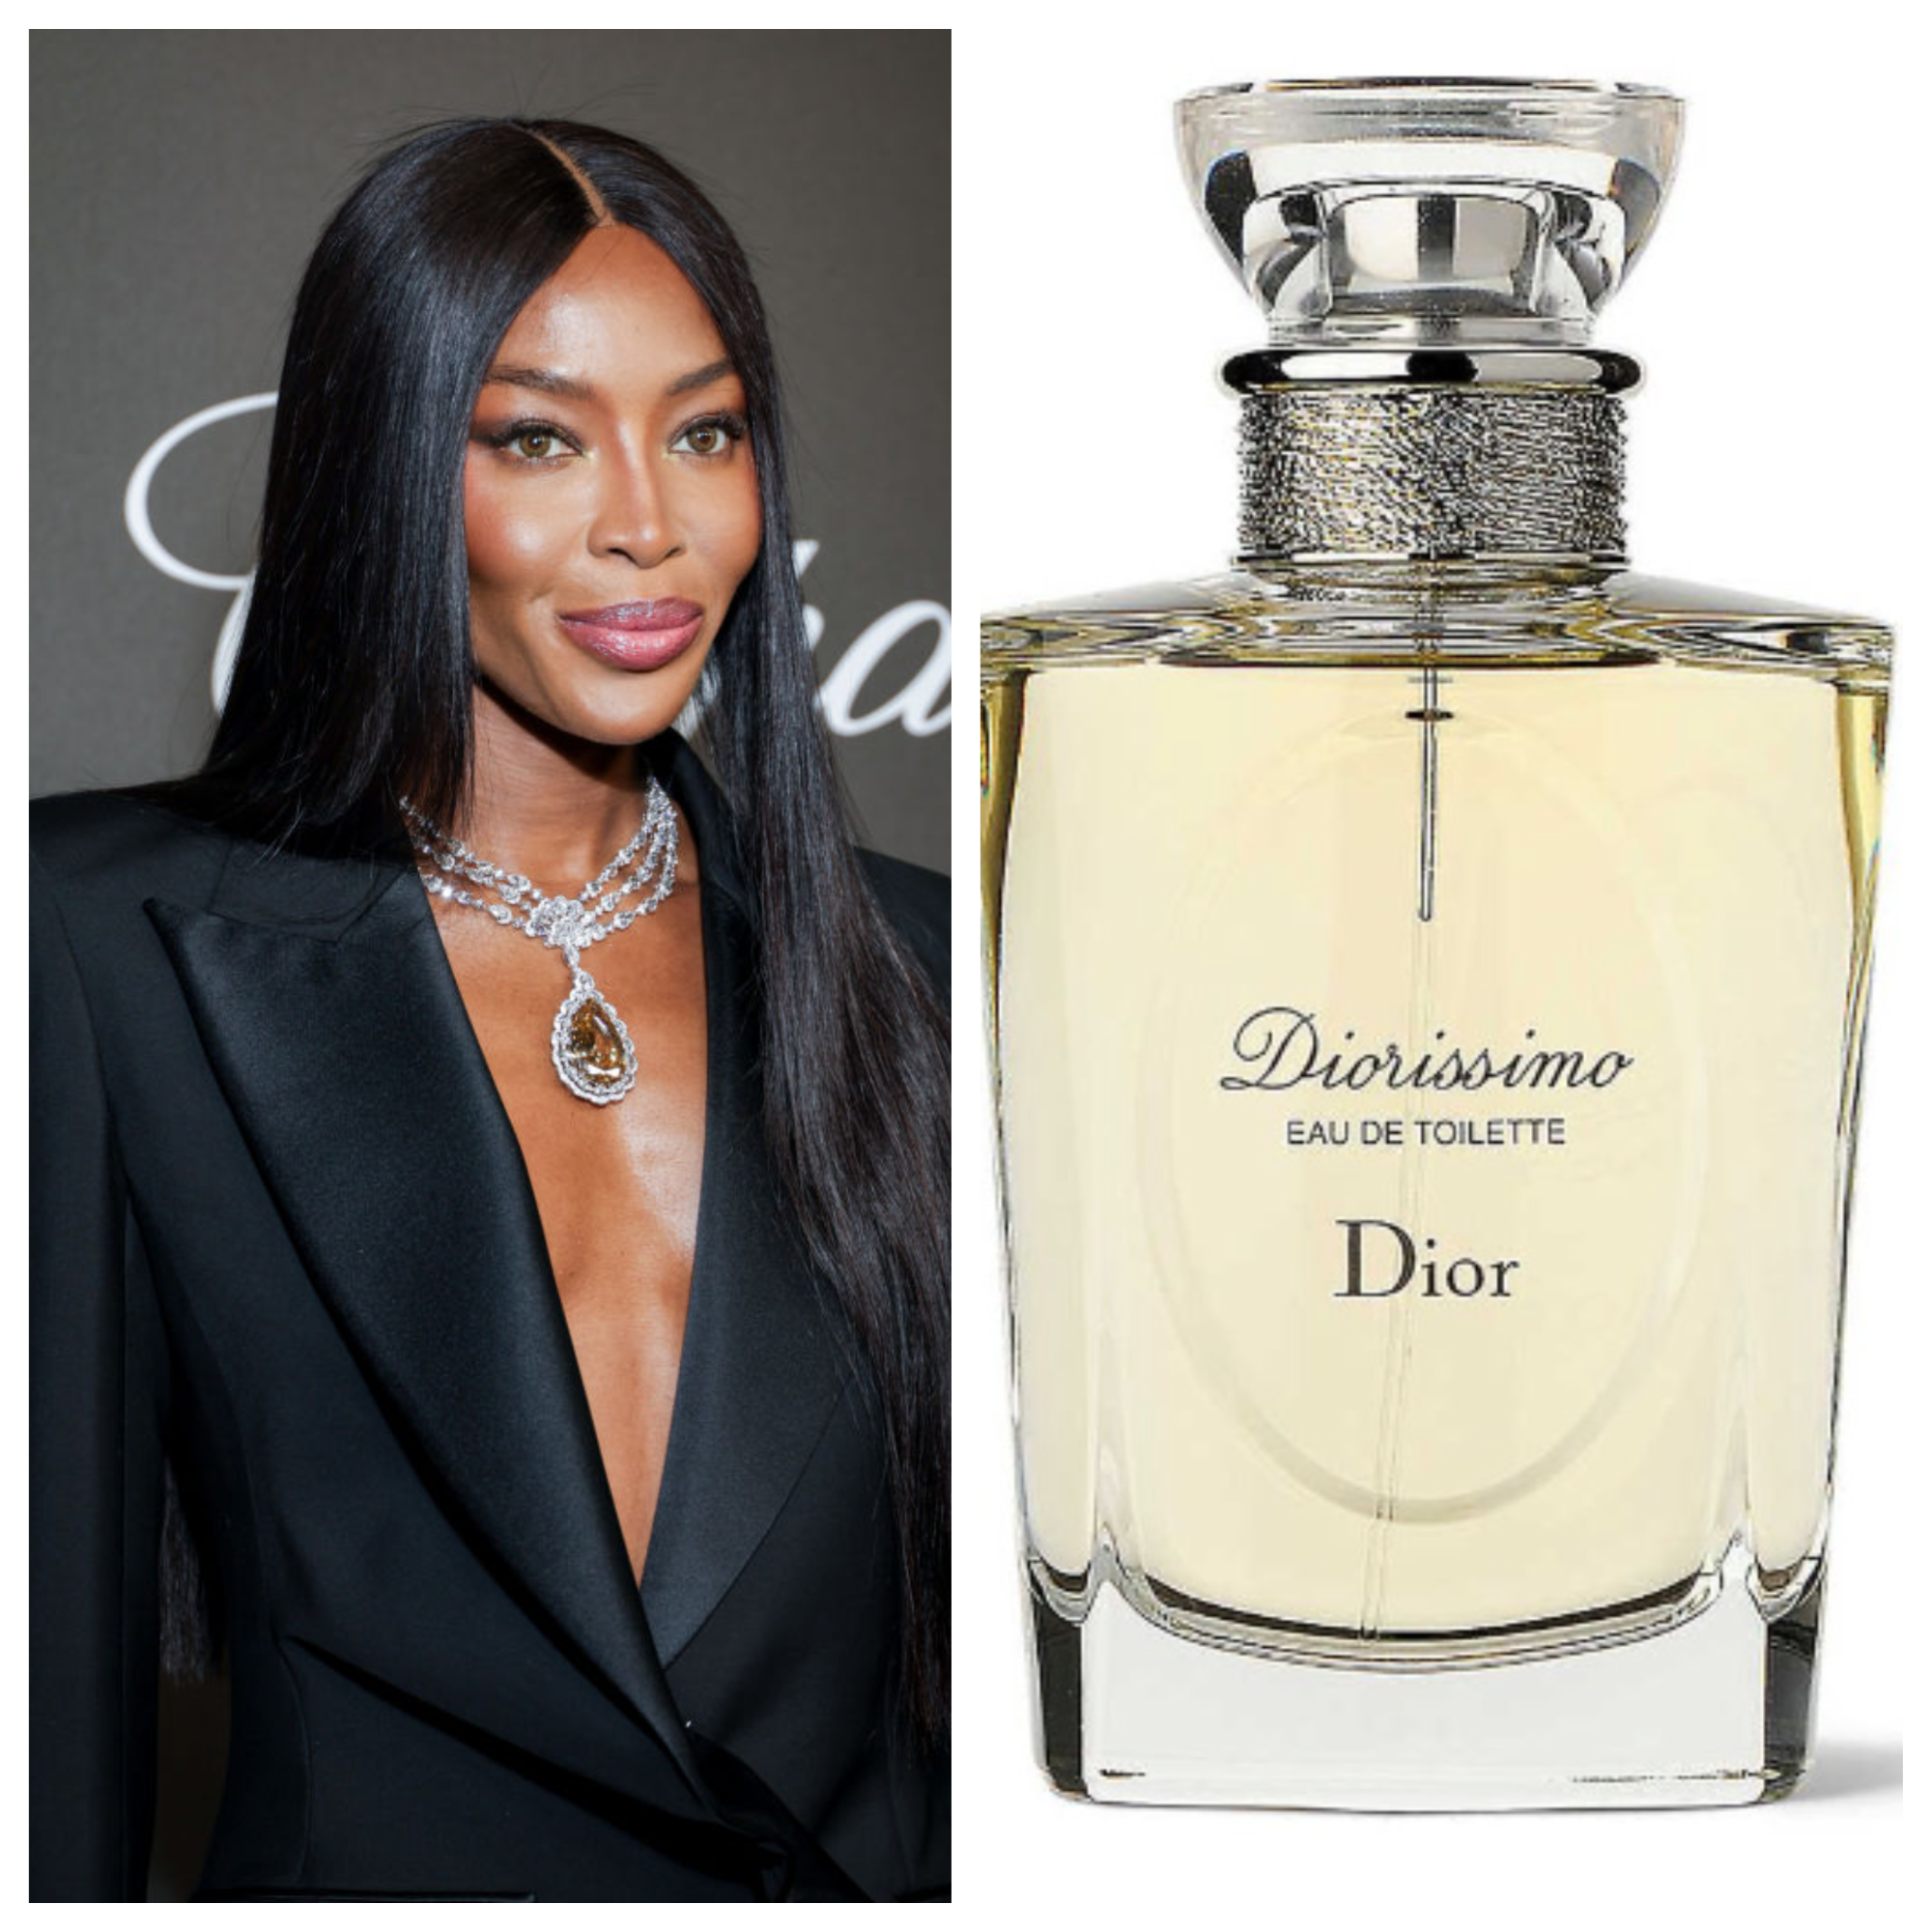 Why Celebrity Fragrances Are So Important to the Perfume World